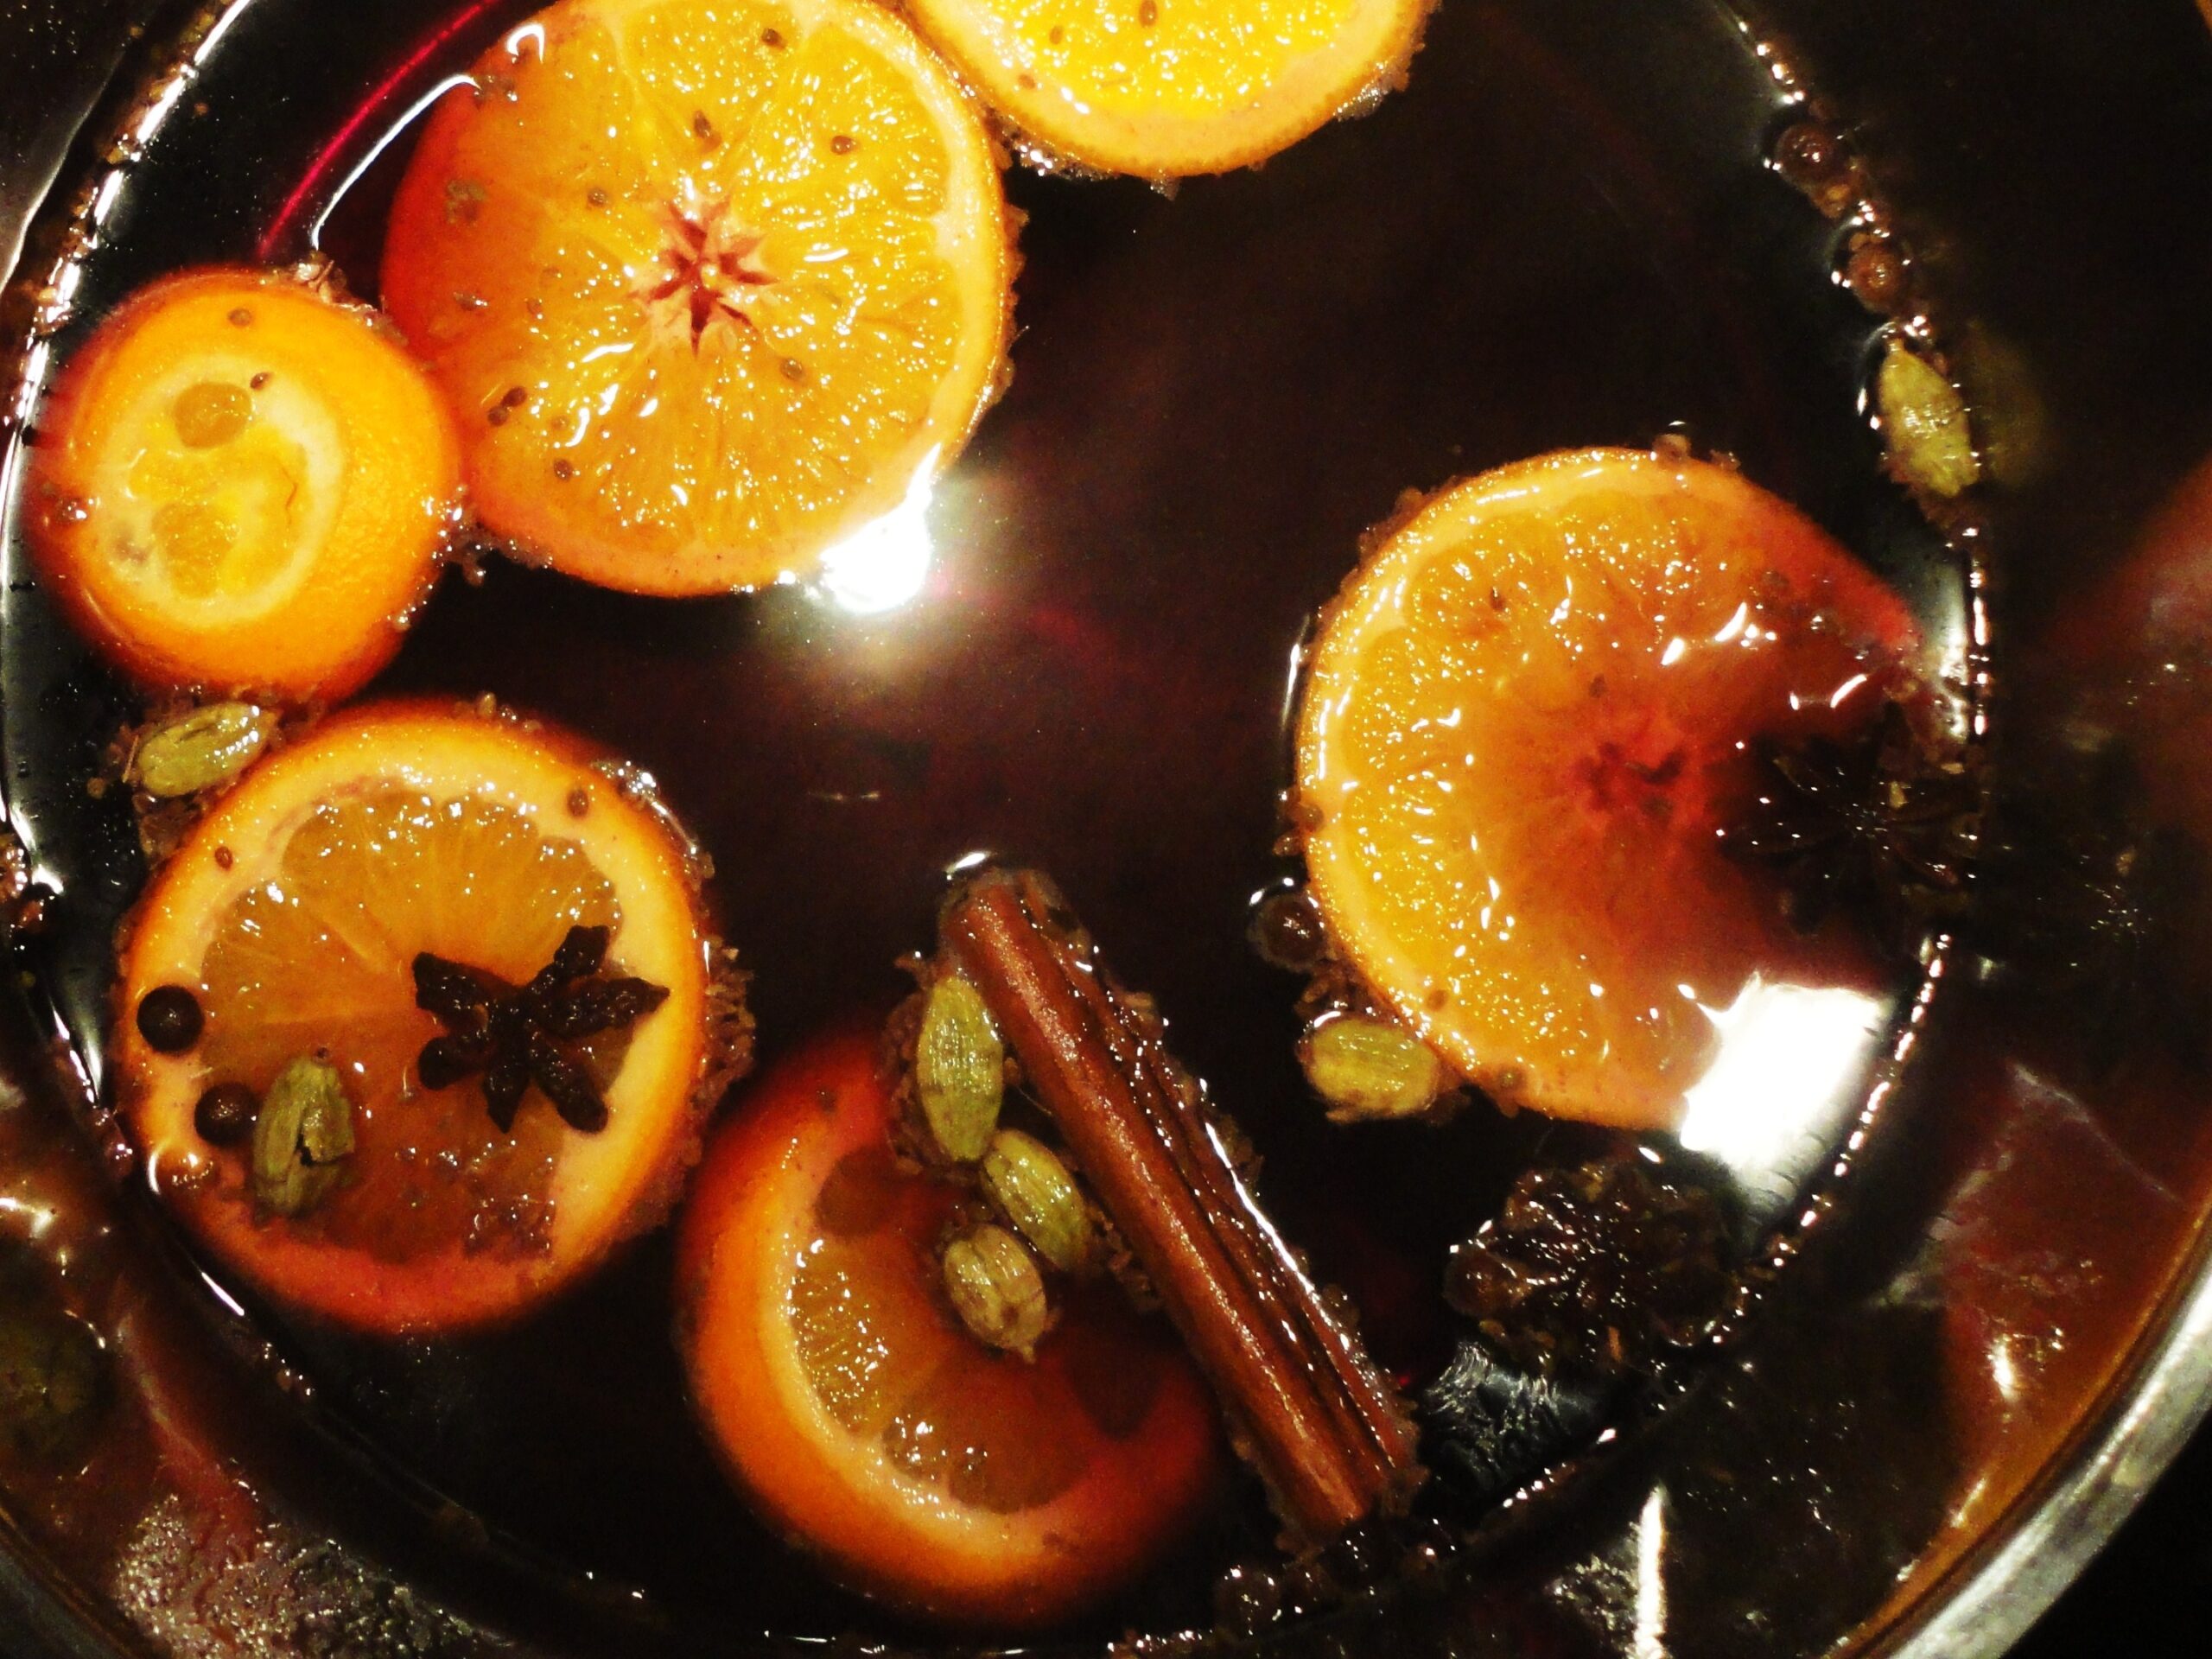 Mulled wine which brits are being offered £50 per hour to taste.